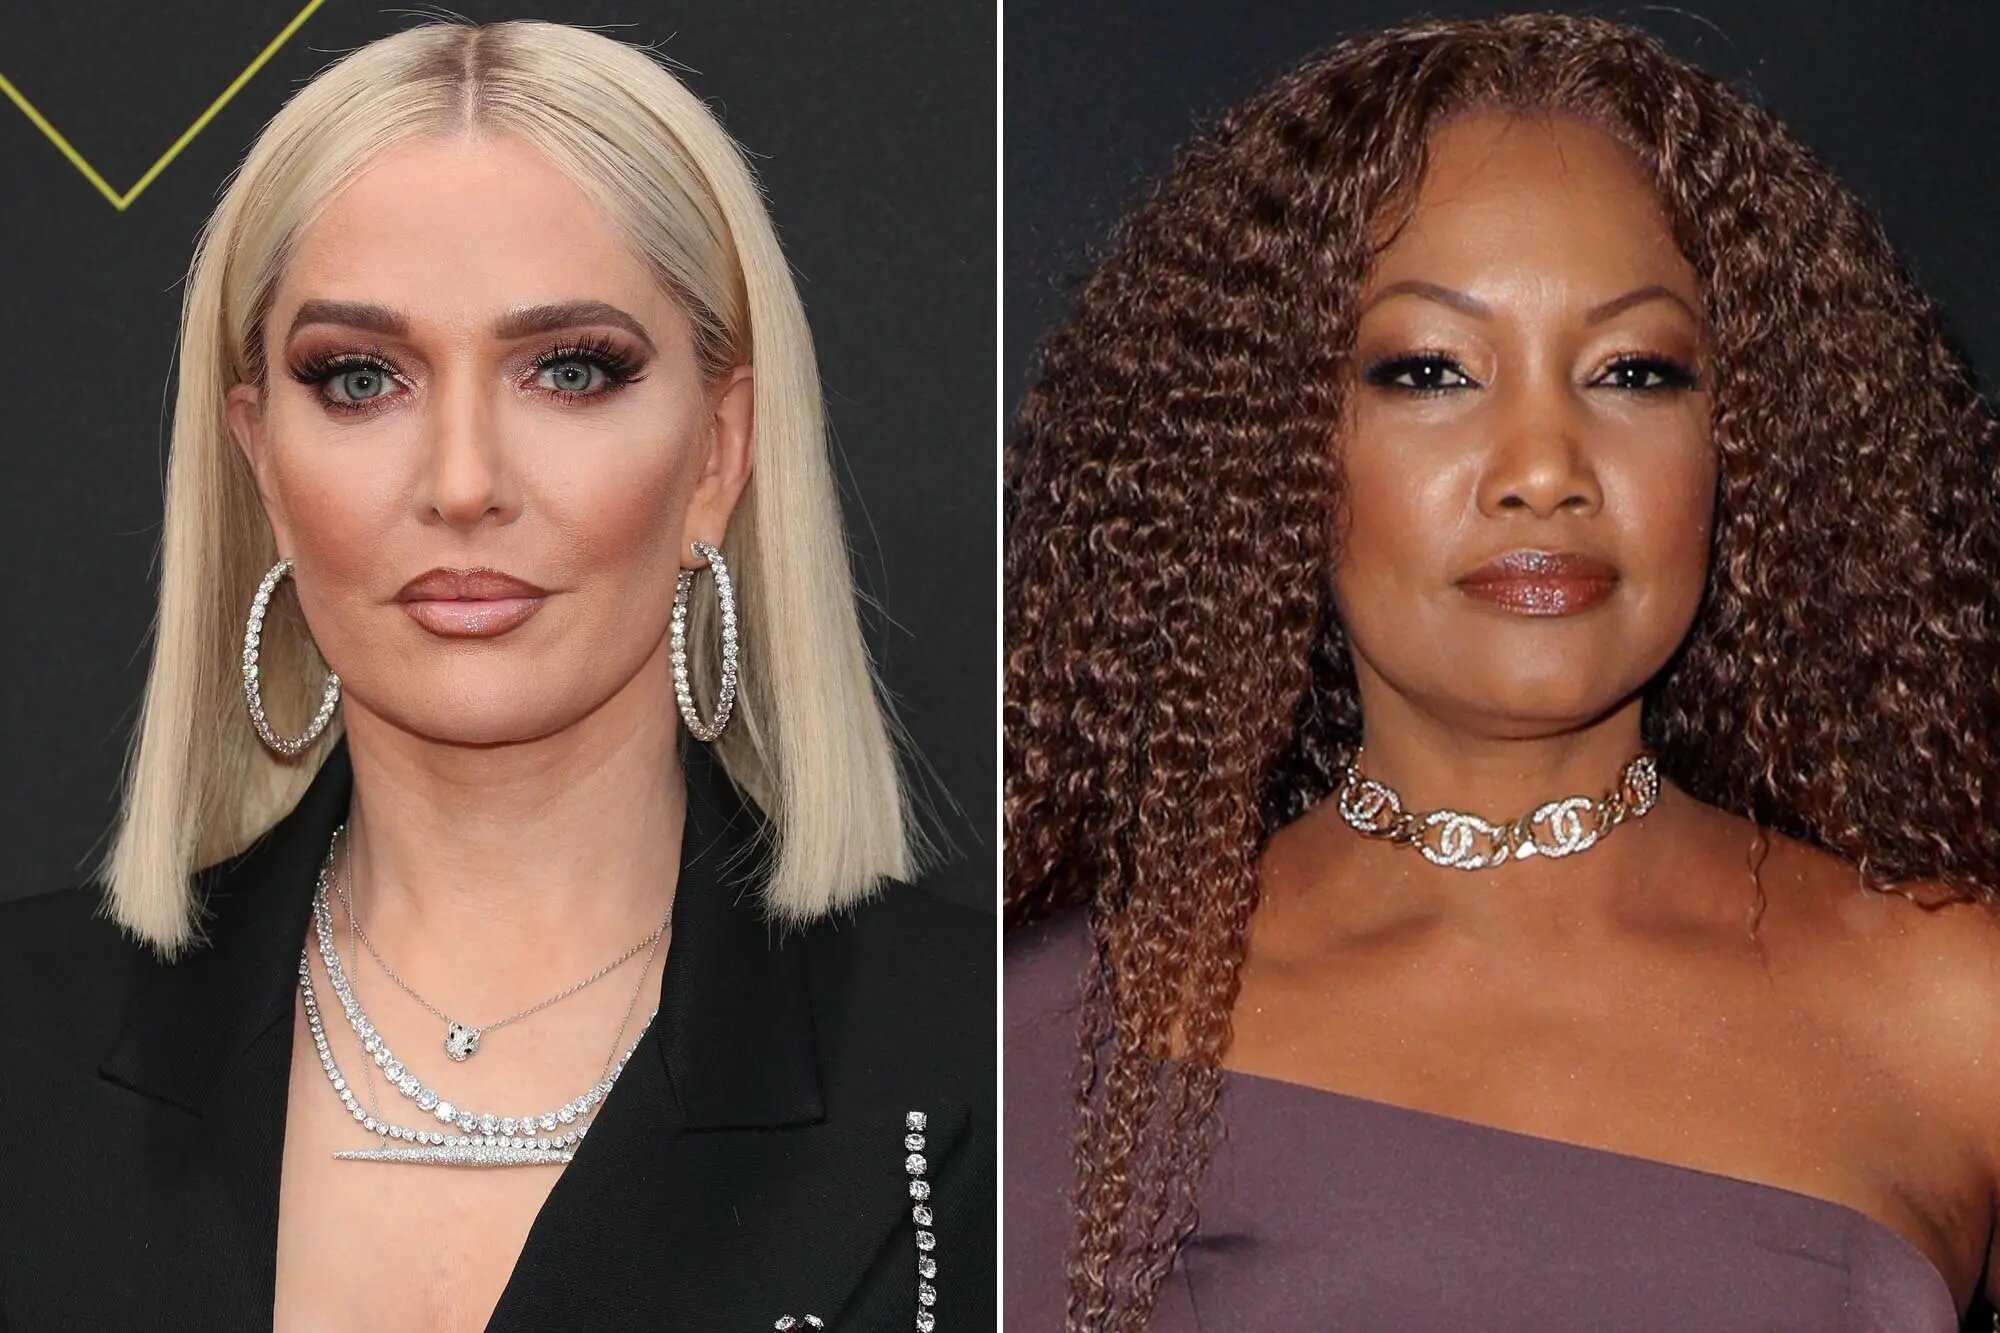 When during a scandal, Erika Jayne shocked with openness, revealed Garcelle Beauvais